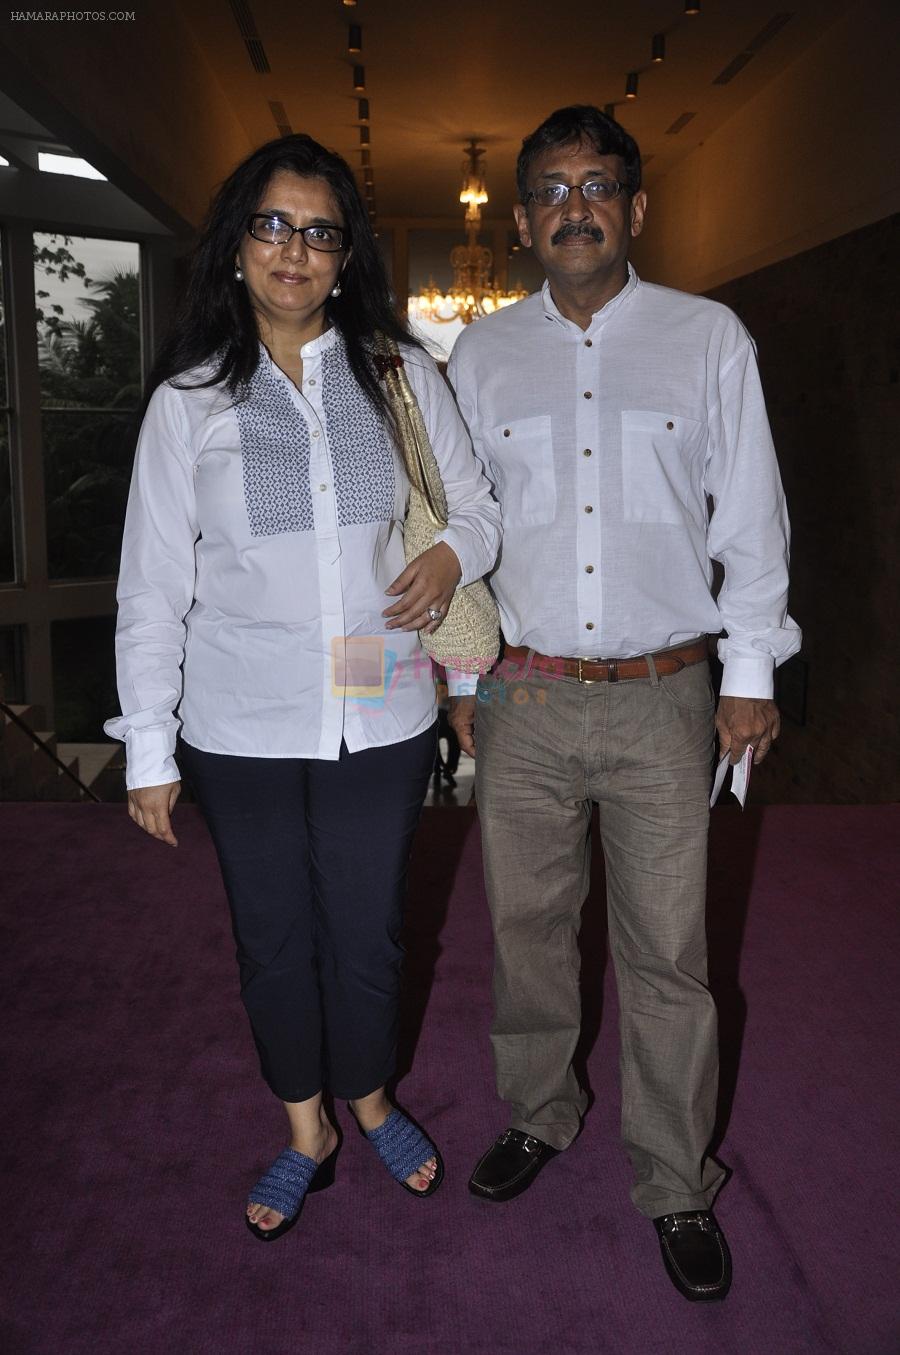 Mr & Mrs Vivek Jain at the premier Show of The Big Fat City, A Play by Ashvin Gidwani productions in Tata NCPA, Mumbai on 23rd June 2013